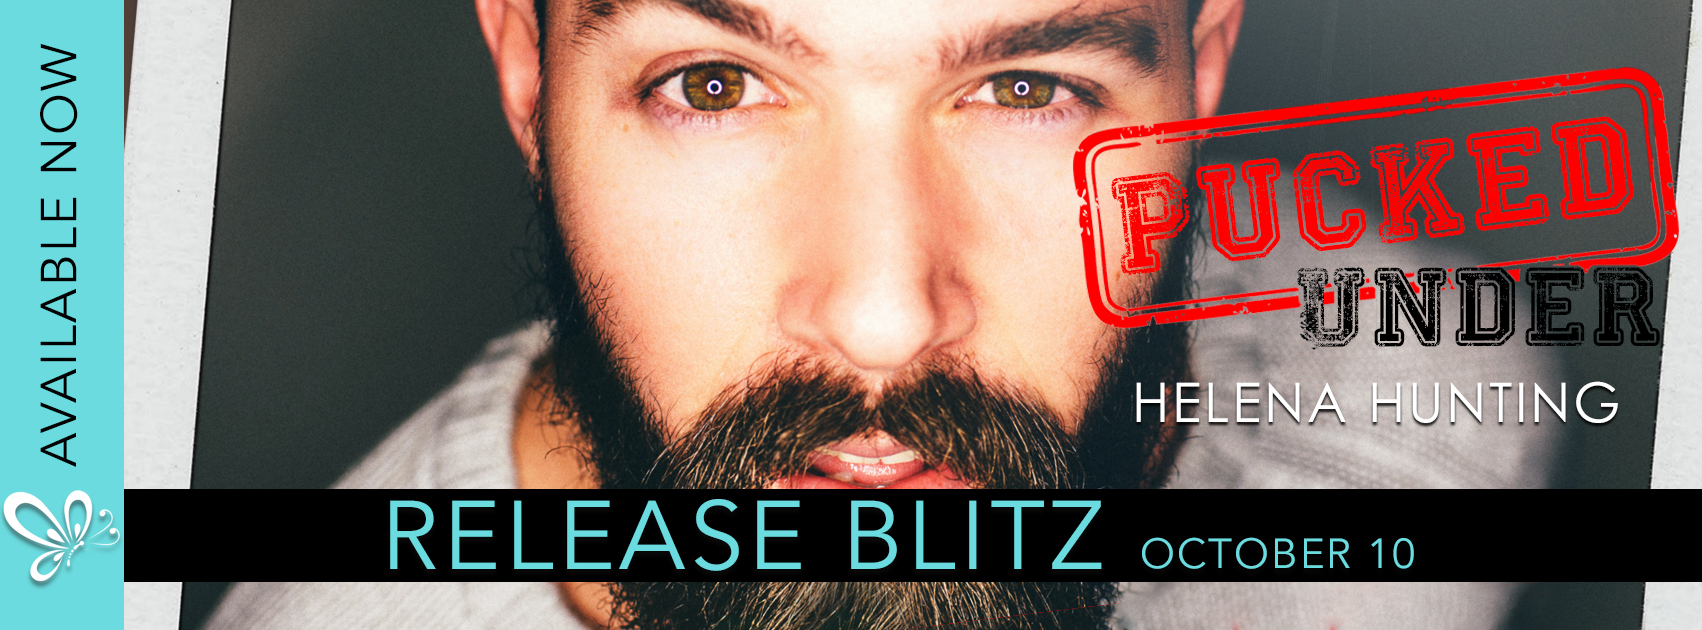 Pucked Under by Helena Hunting #ReleaseBlitz #Review #5stars @HelenaHunting